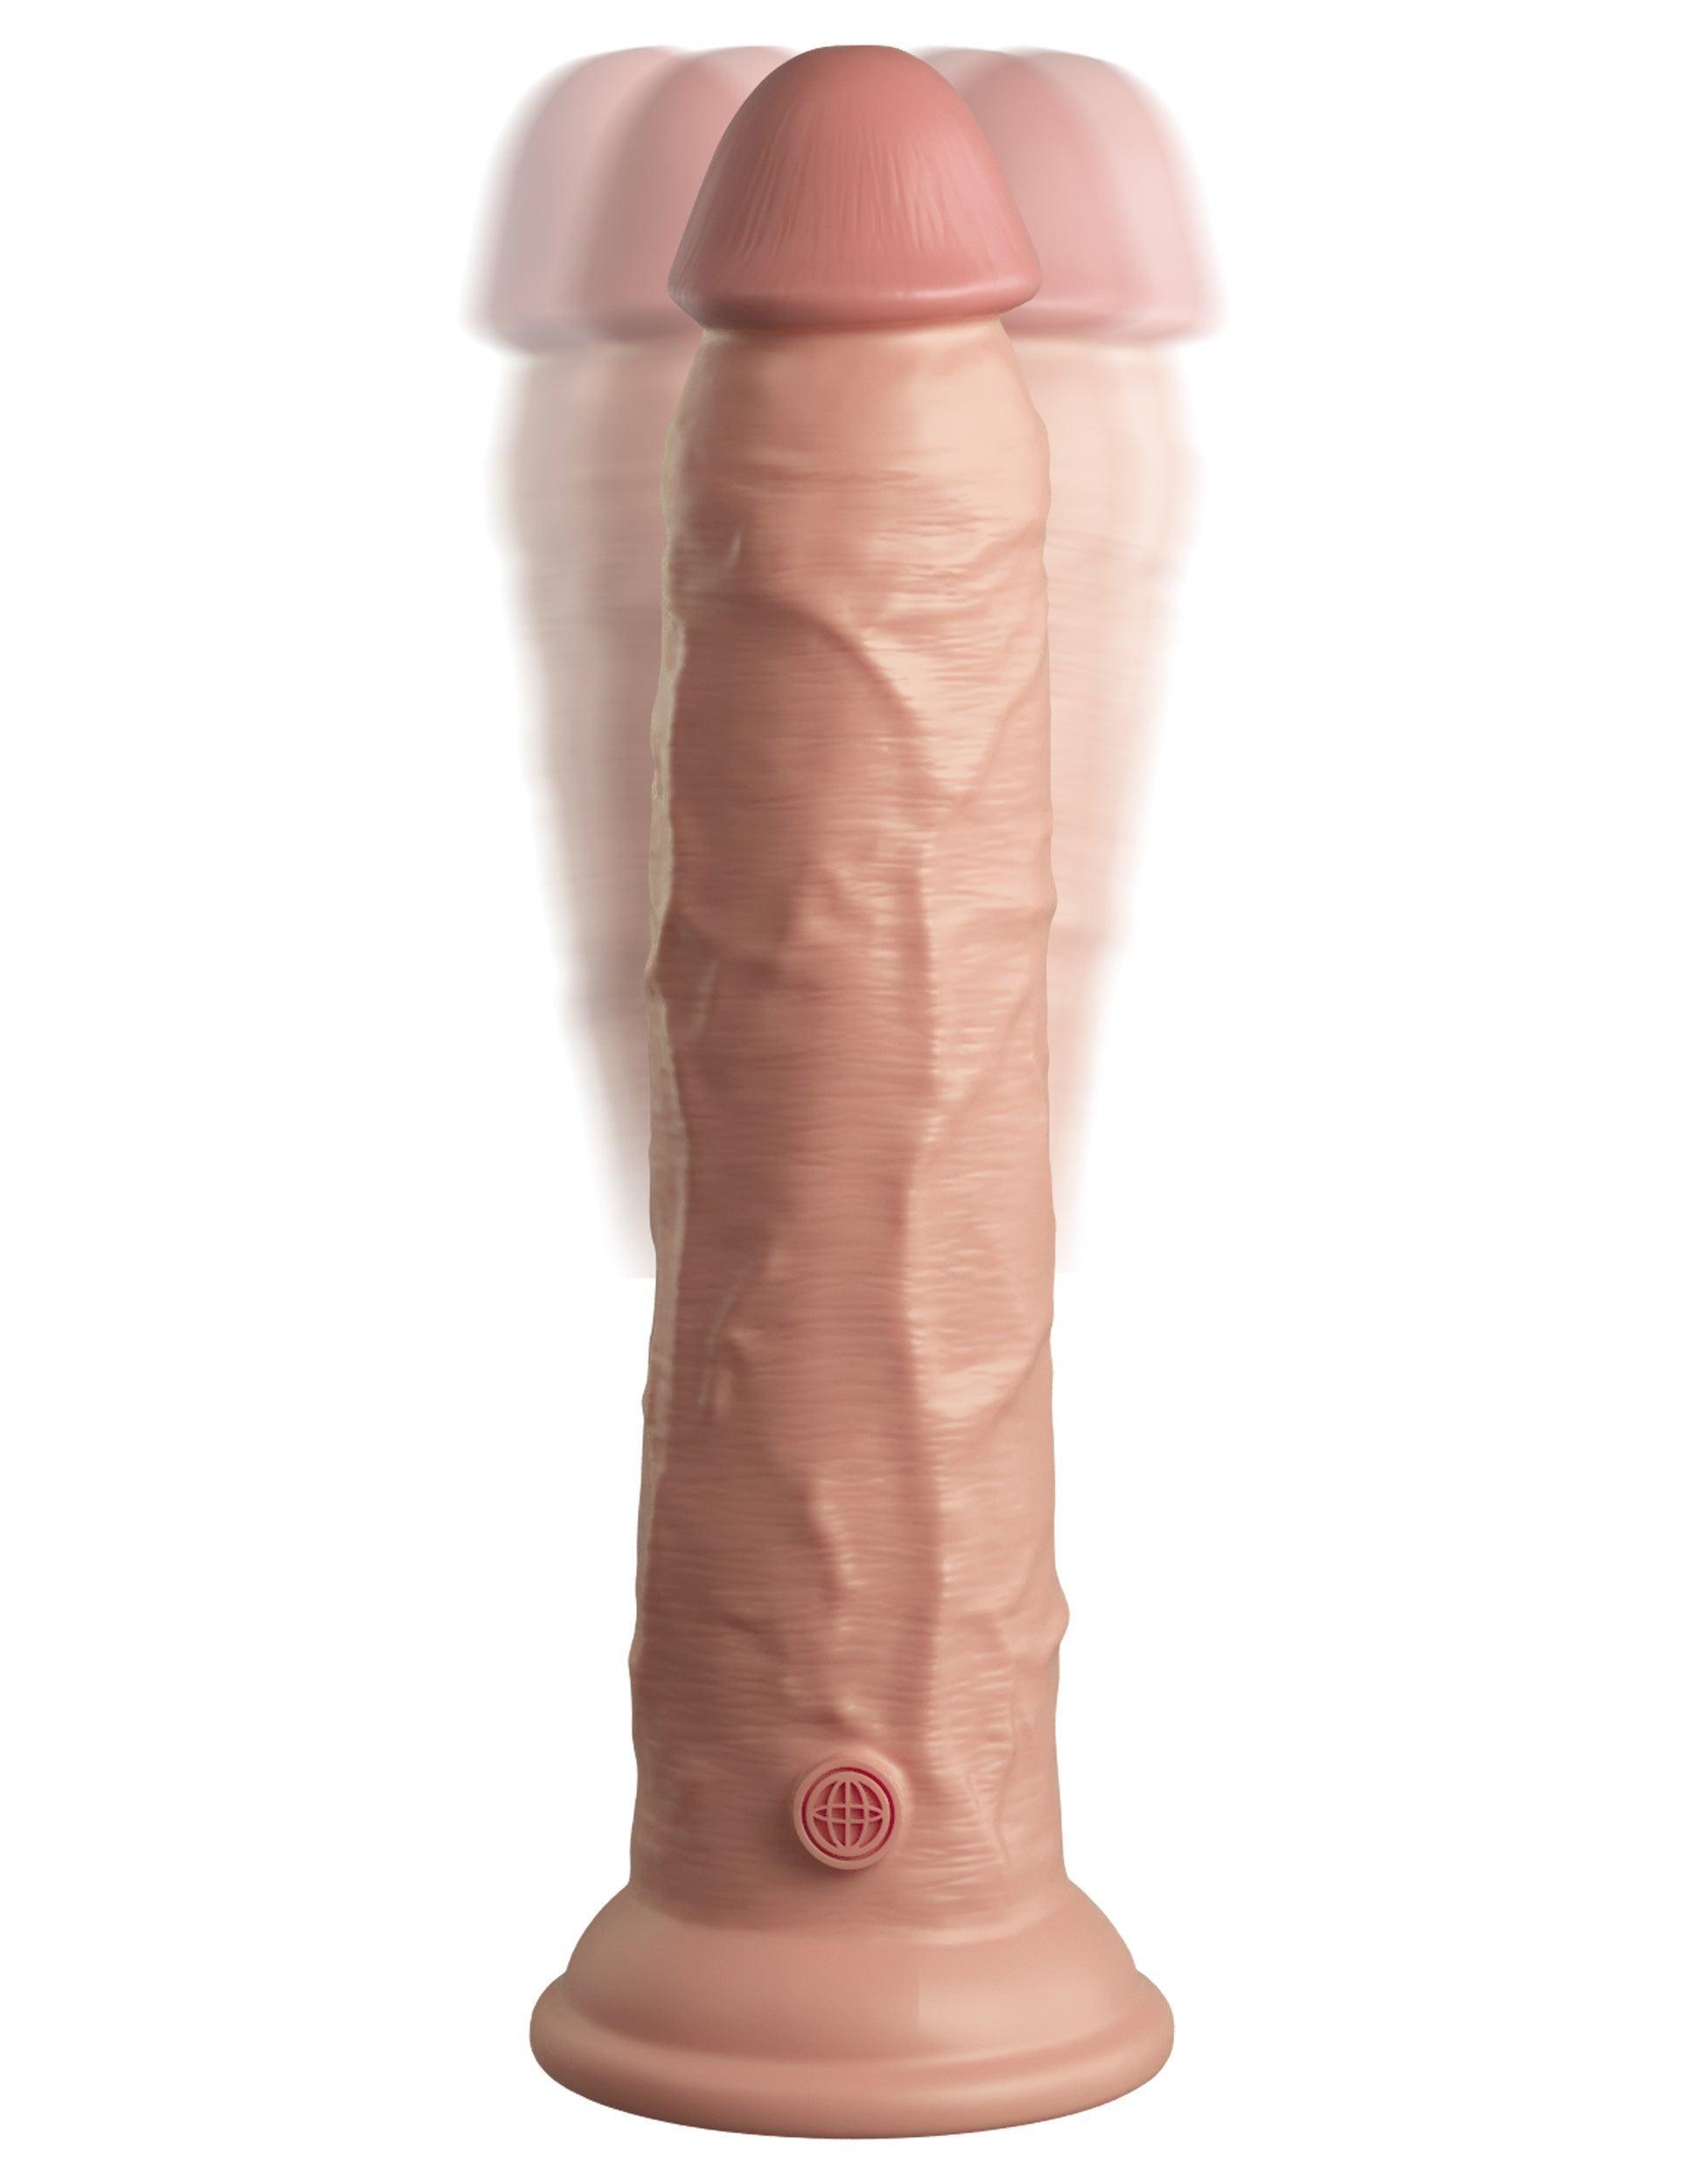 King Cock Elite 9 Inch Vibrating Silicone Dual Density Cock With Remote - Light - My Sex Toy Hub